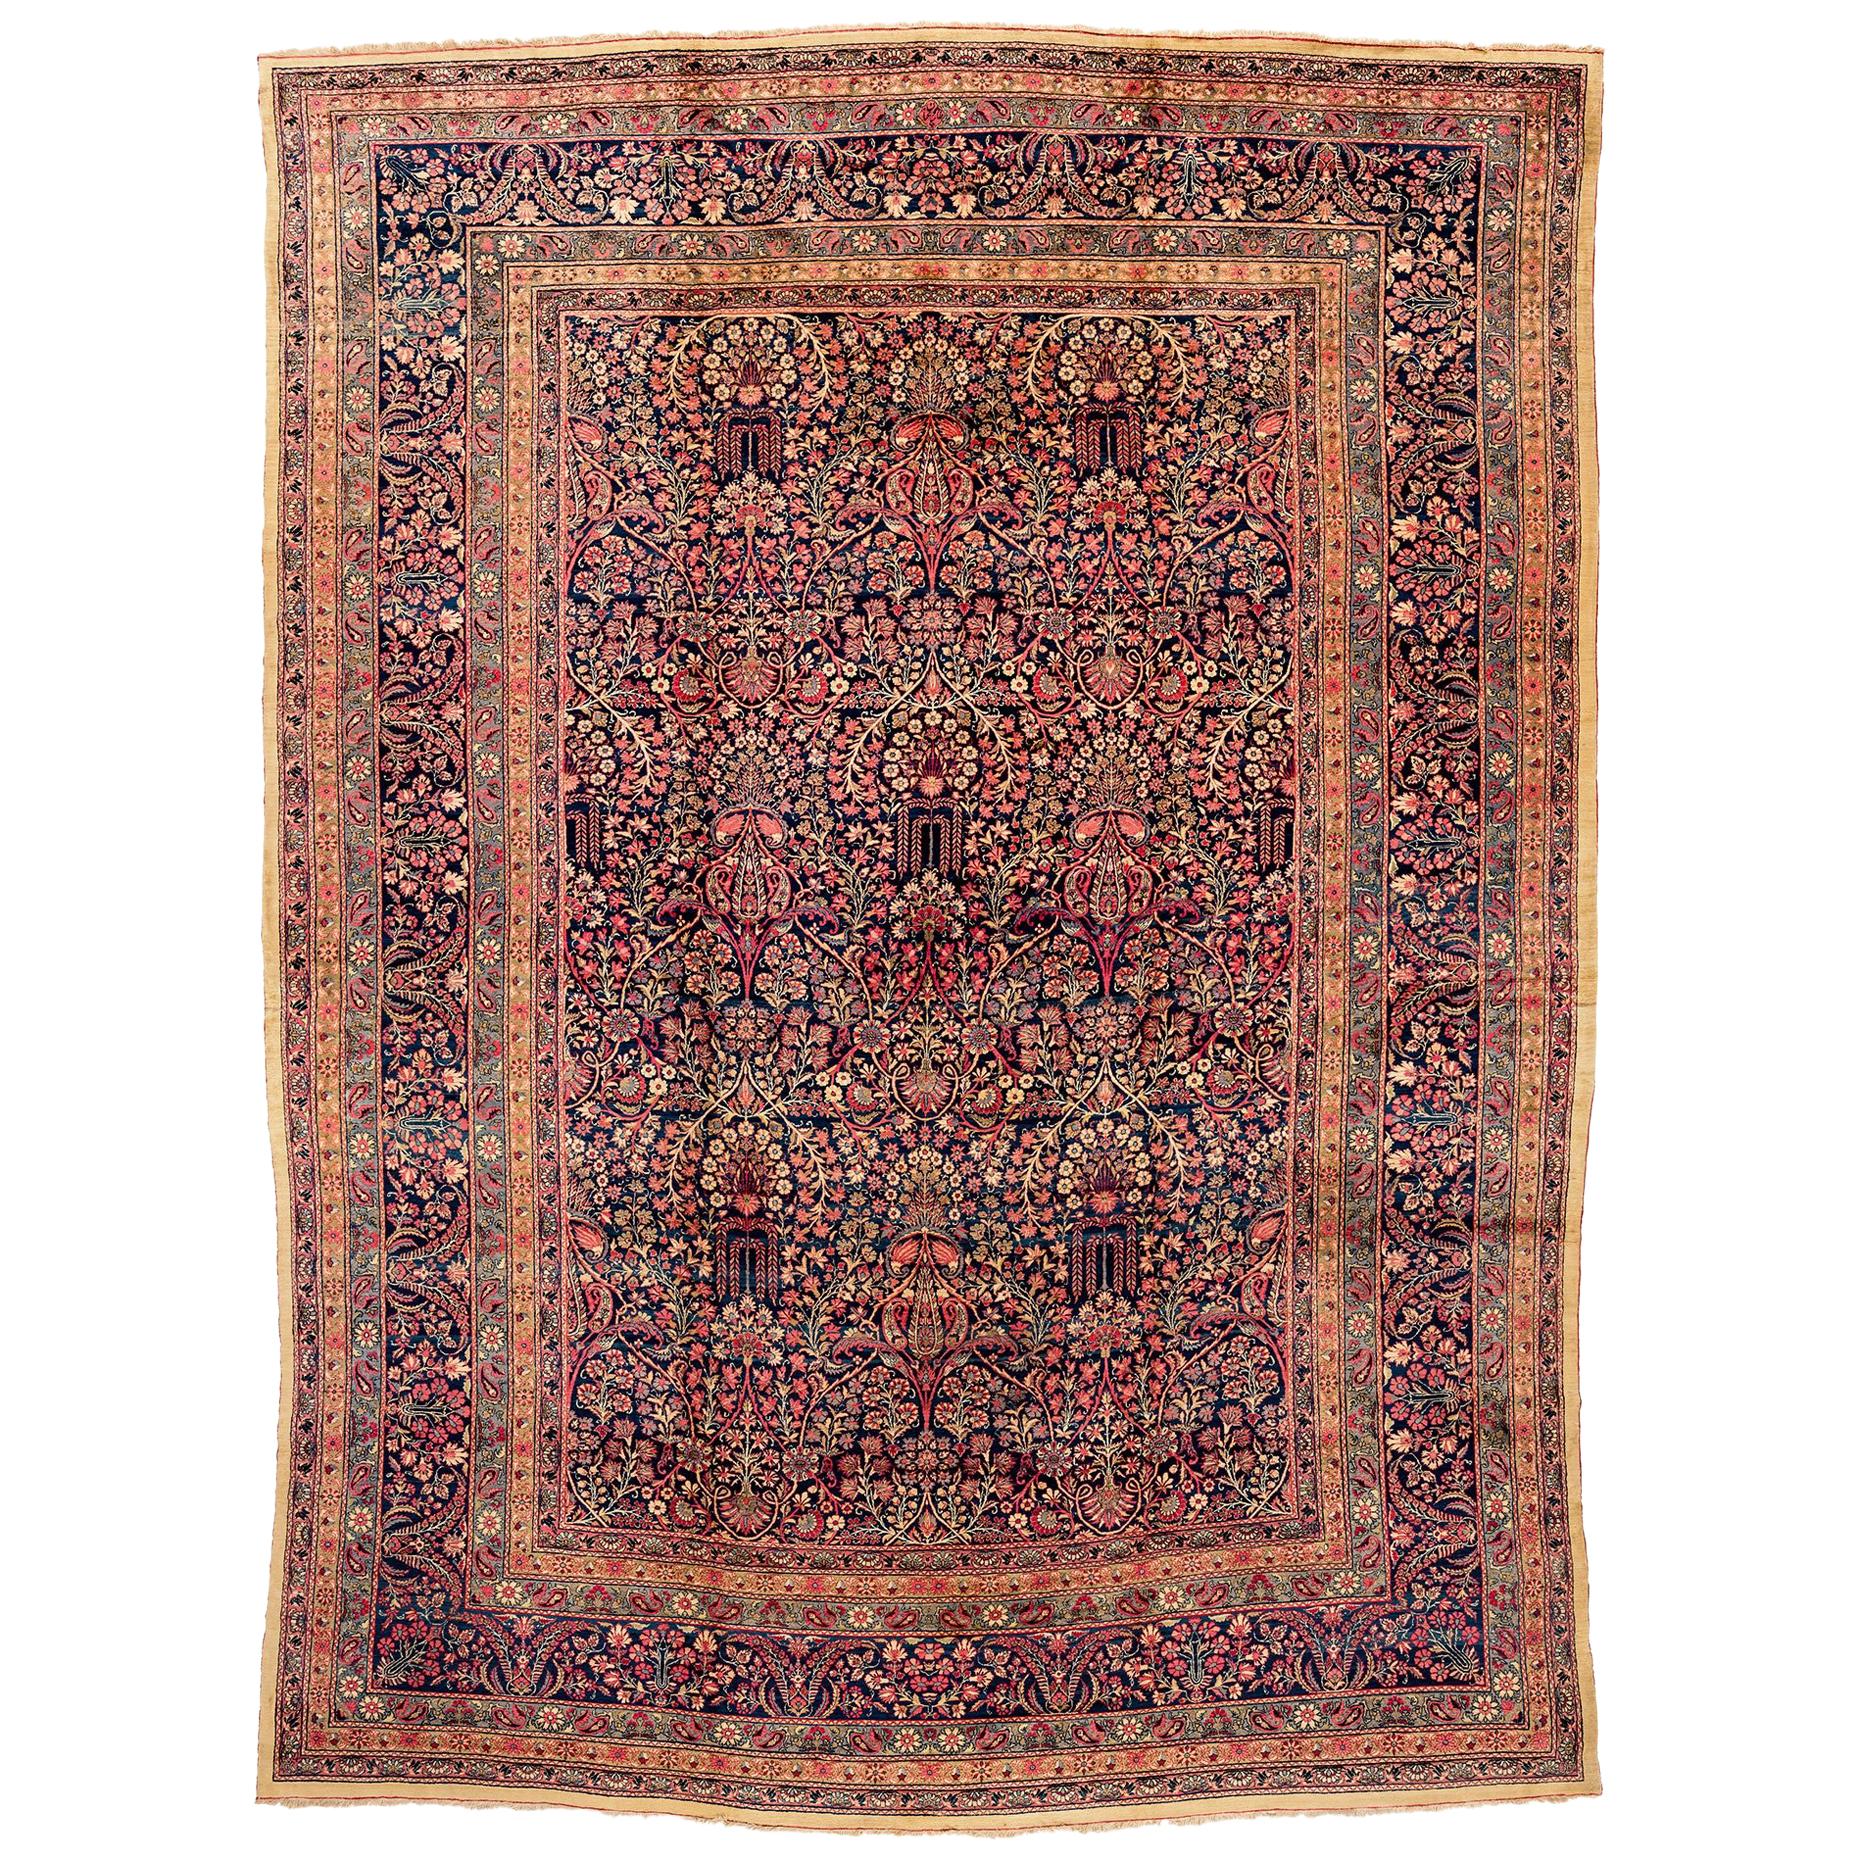 Antique Persian Lavar Kerman Rug with Floral All-Over Design Extremely Detailed For Sale